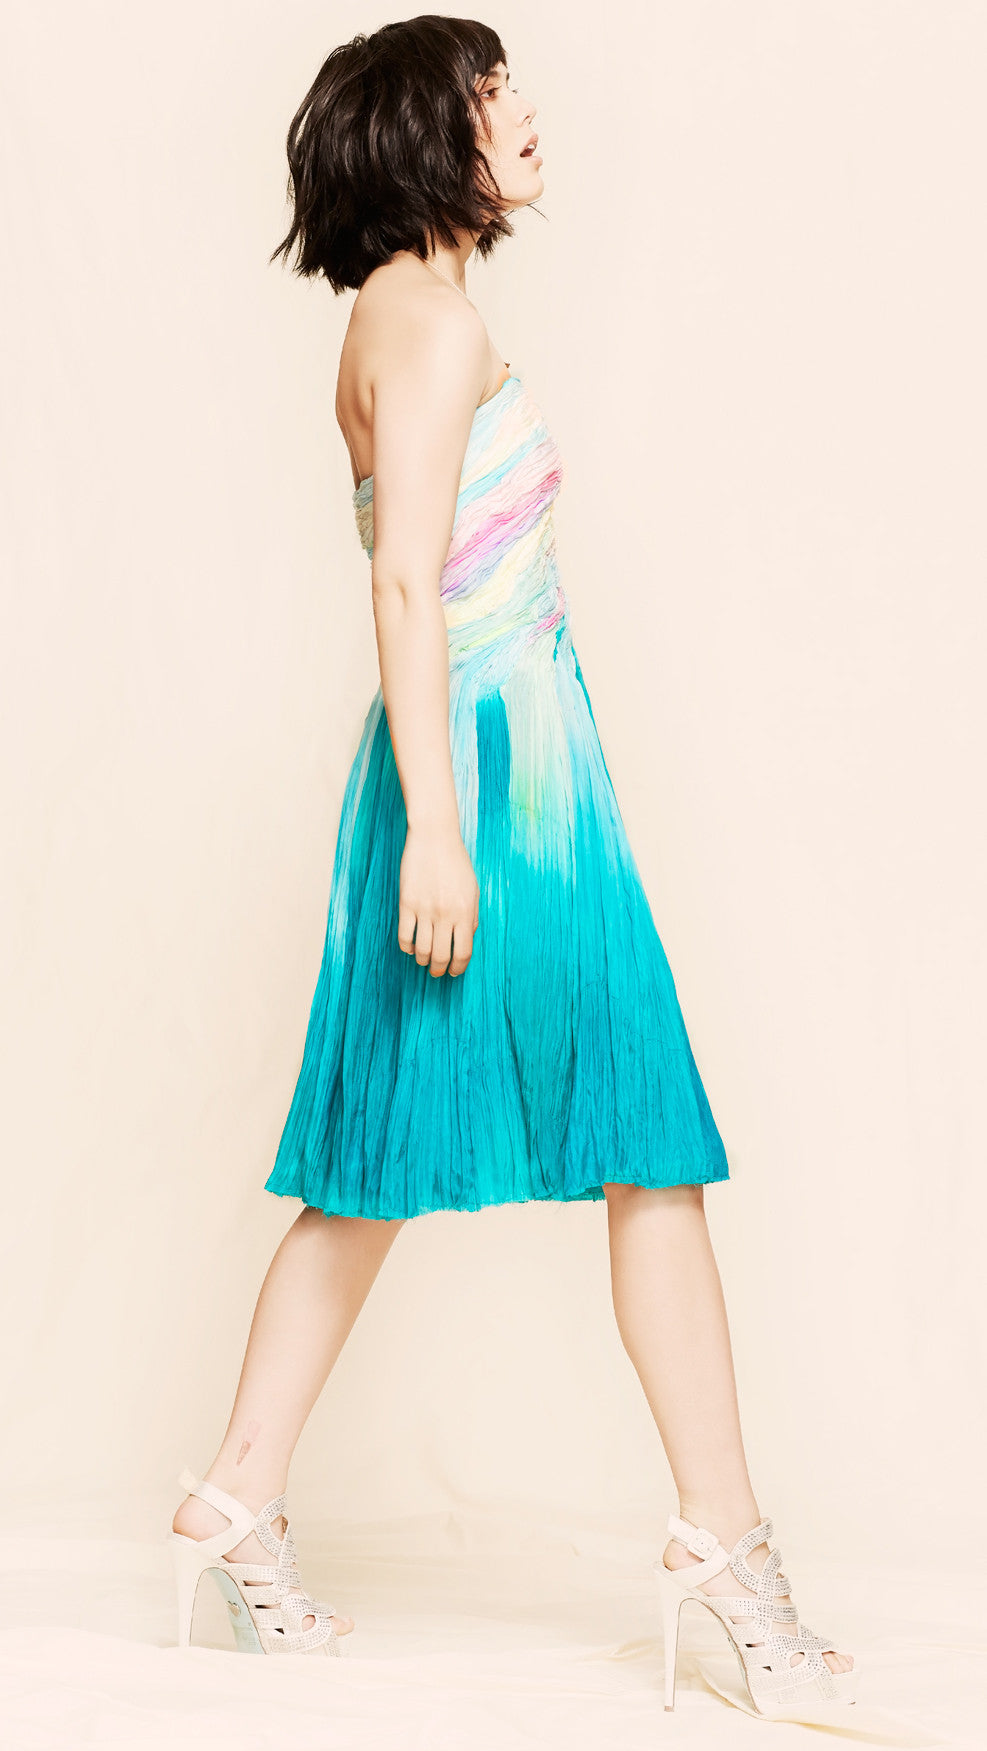 oda - cotton candy strapless dress - side view